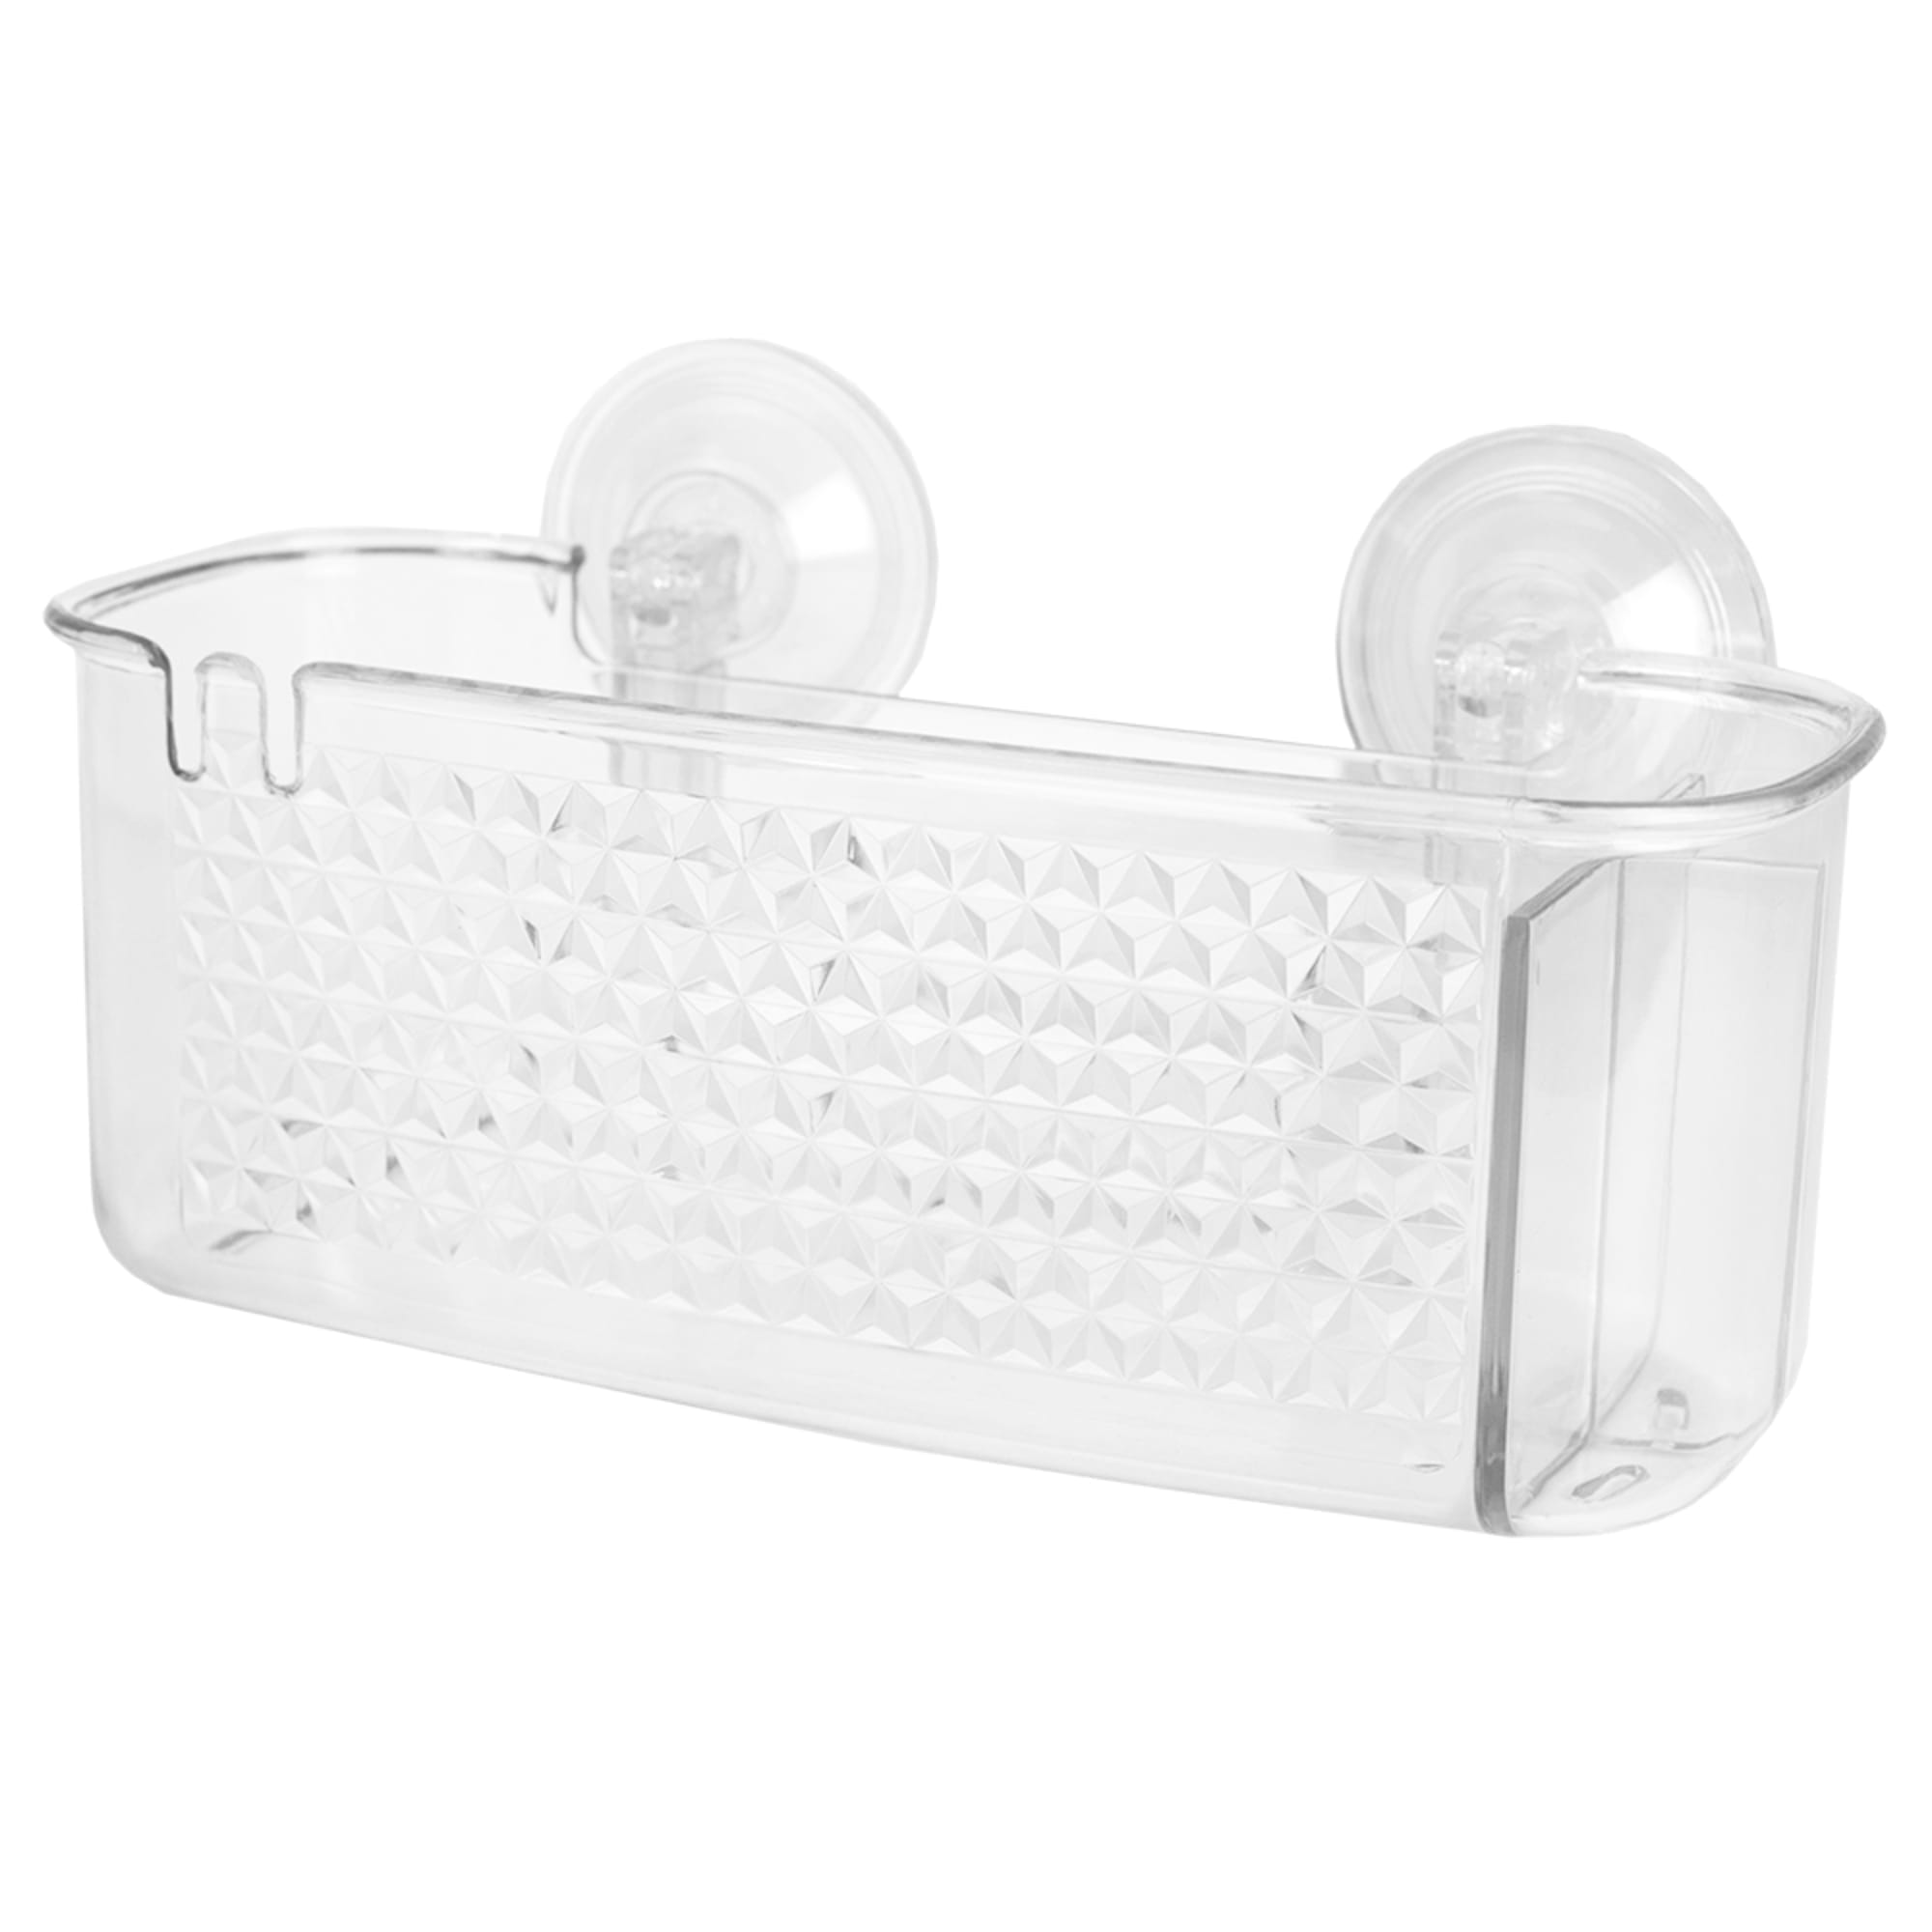 Home Basics Large Cubic Patterned Plastic Shower Caddy with Suction Cups, Clear $4 EACH, CASE PACK OF 24